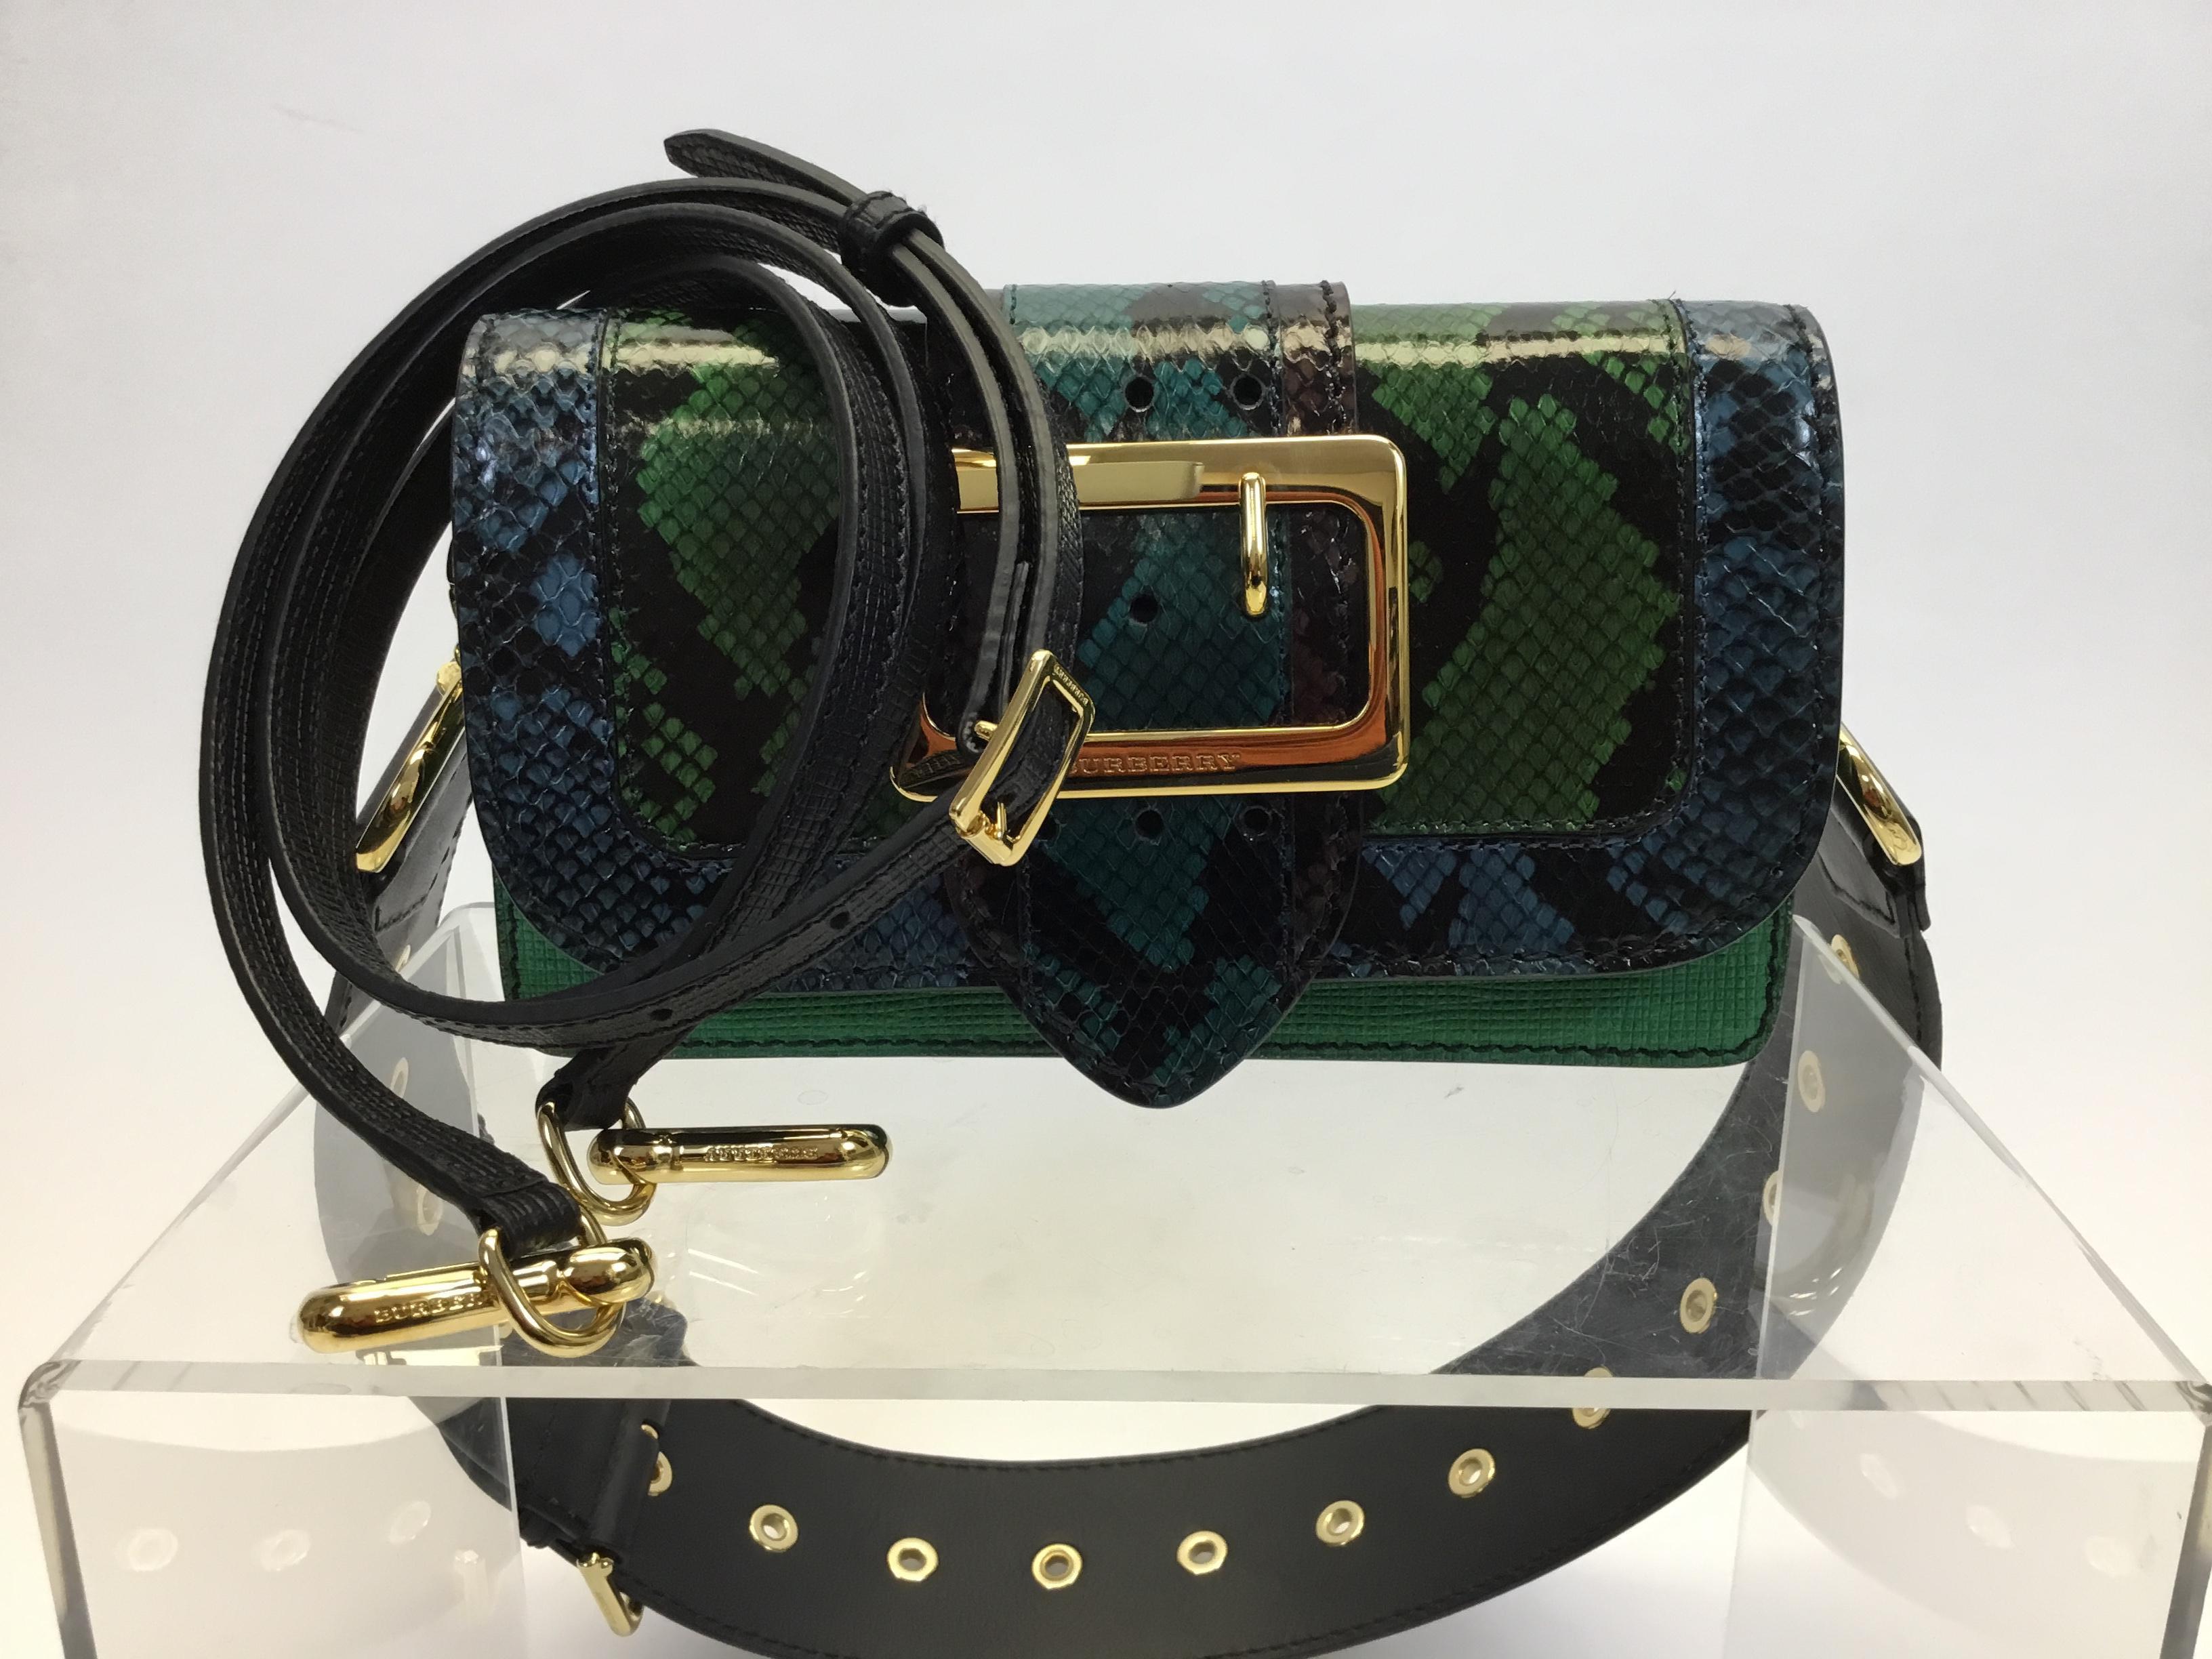 Burberry Limited Edition Snakeskin Bag with Two Straps NWT For Sale 3